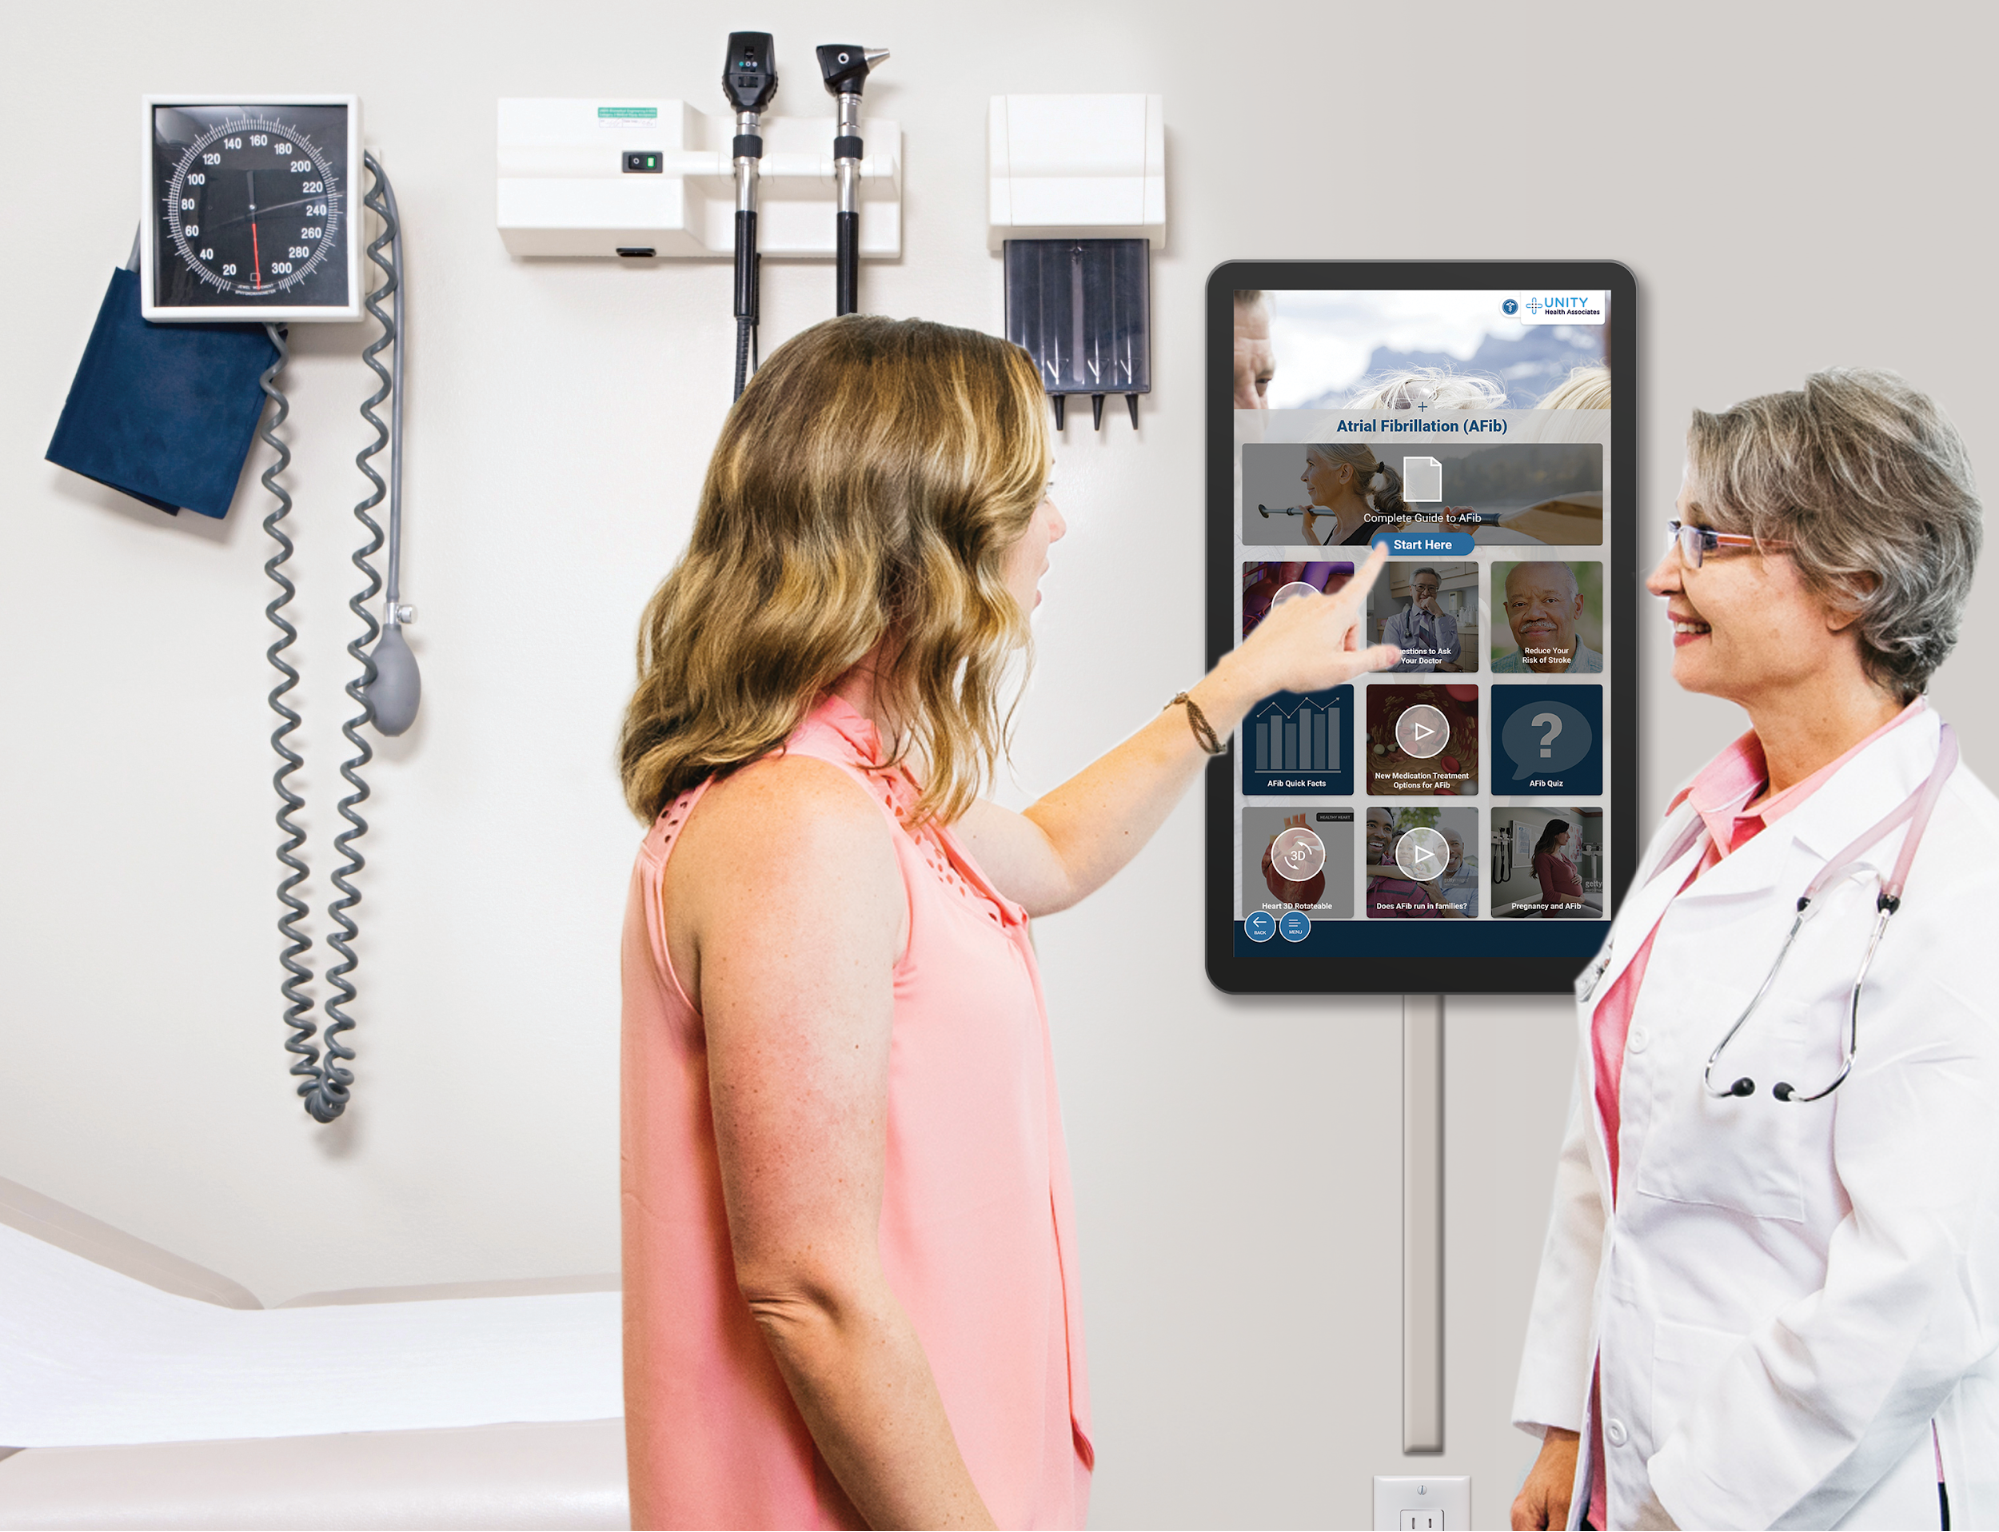 A photo of a doctor using point-of-care technology: showing a patient something on a tablet or on a wall display